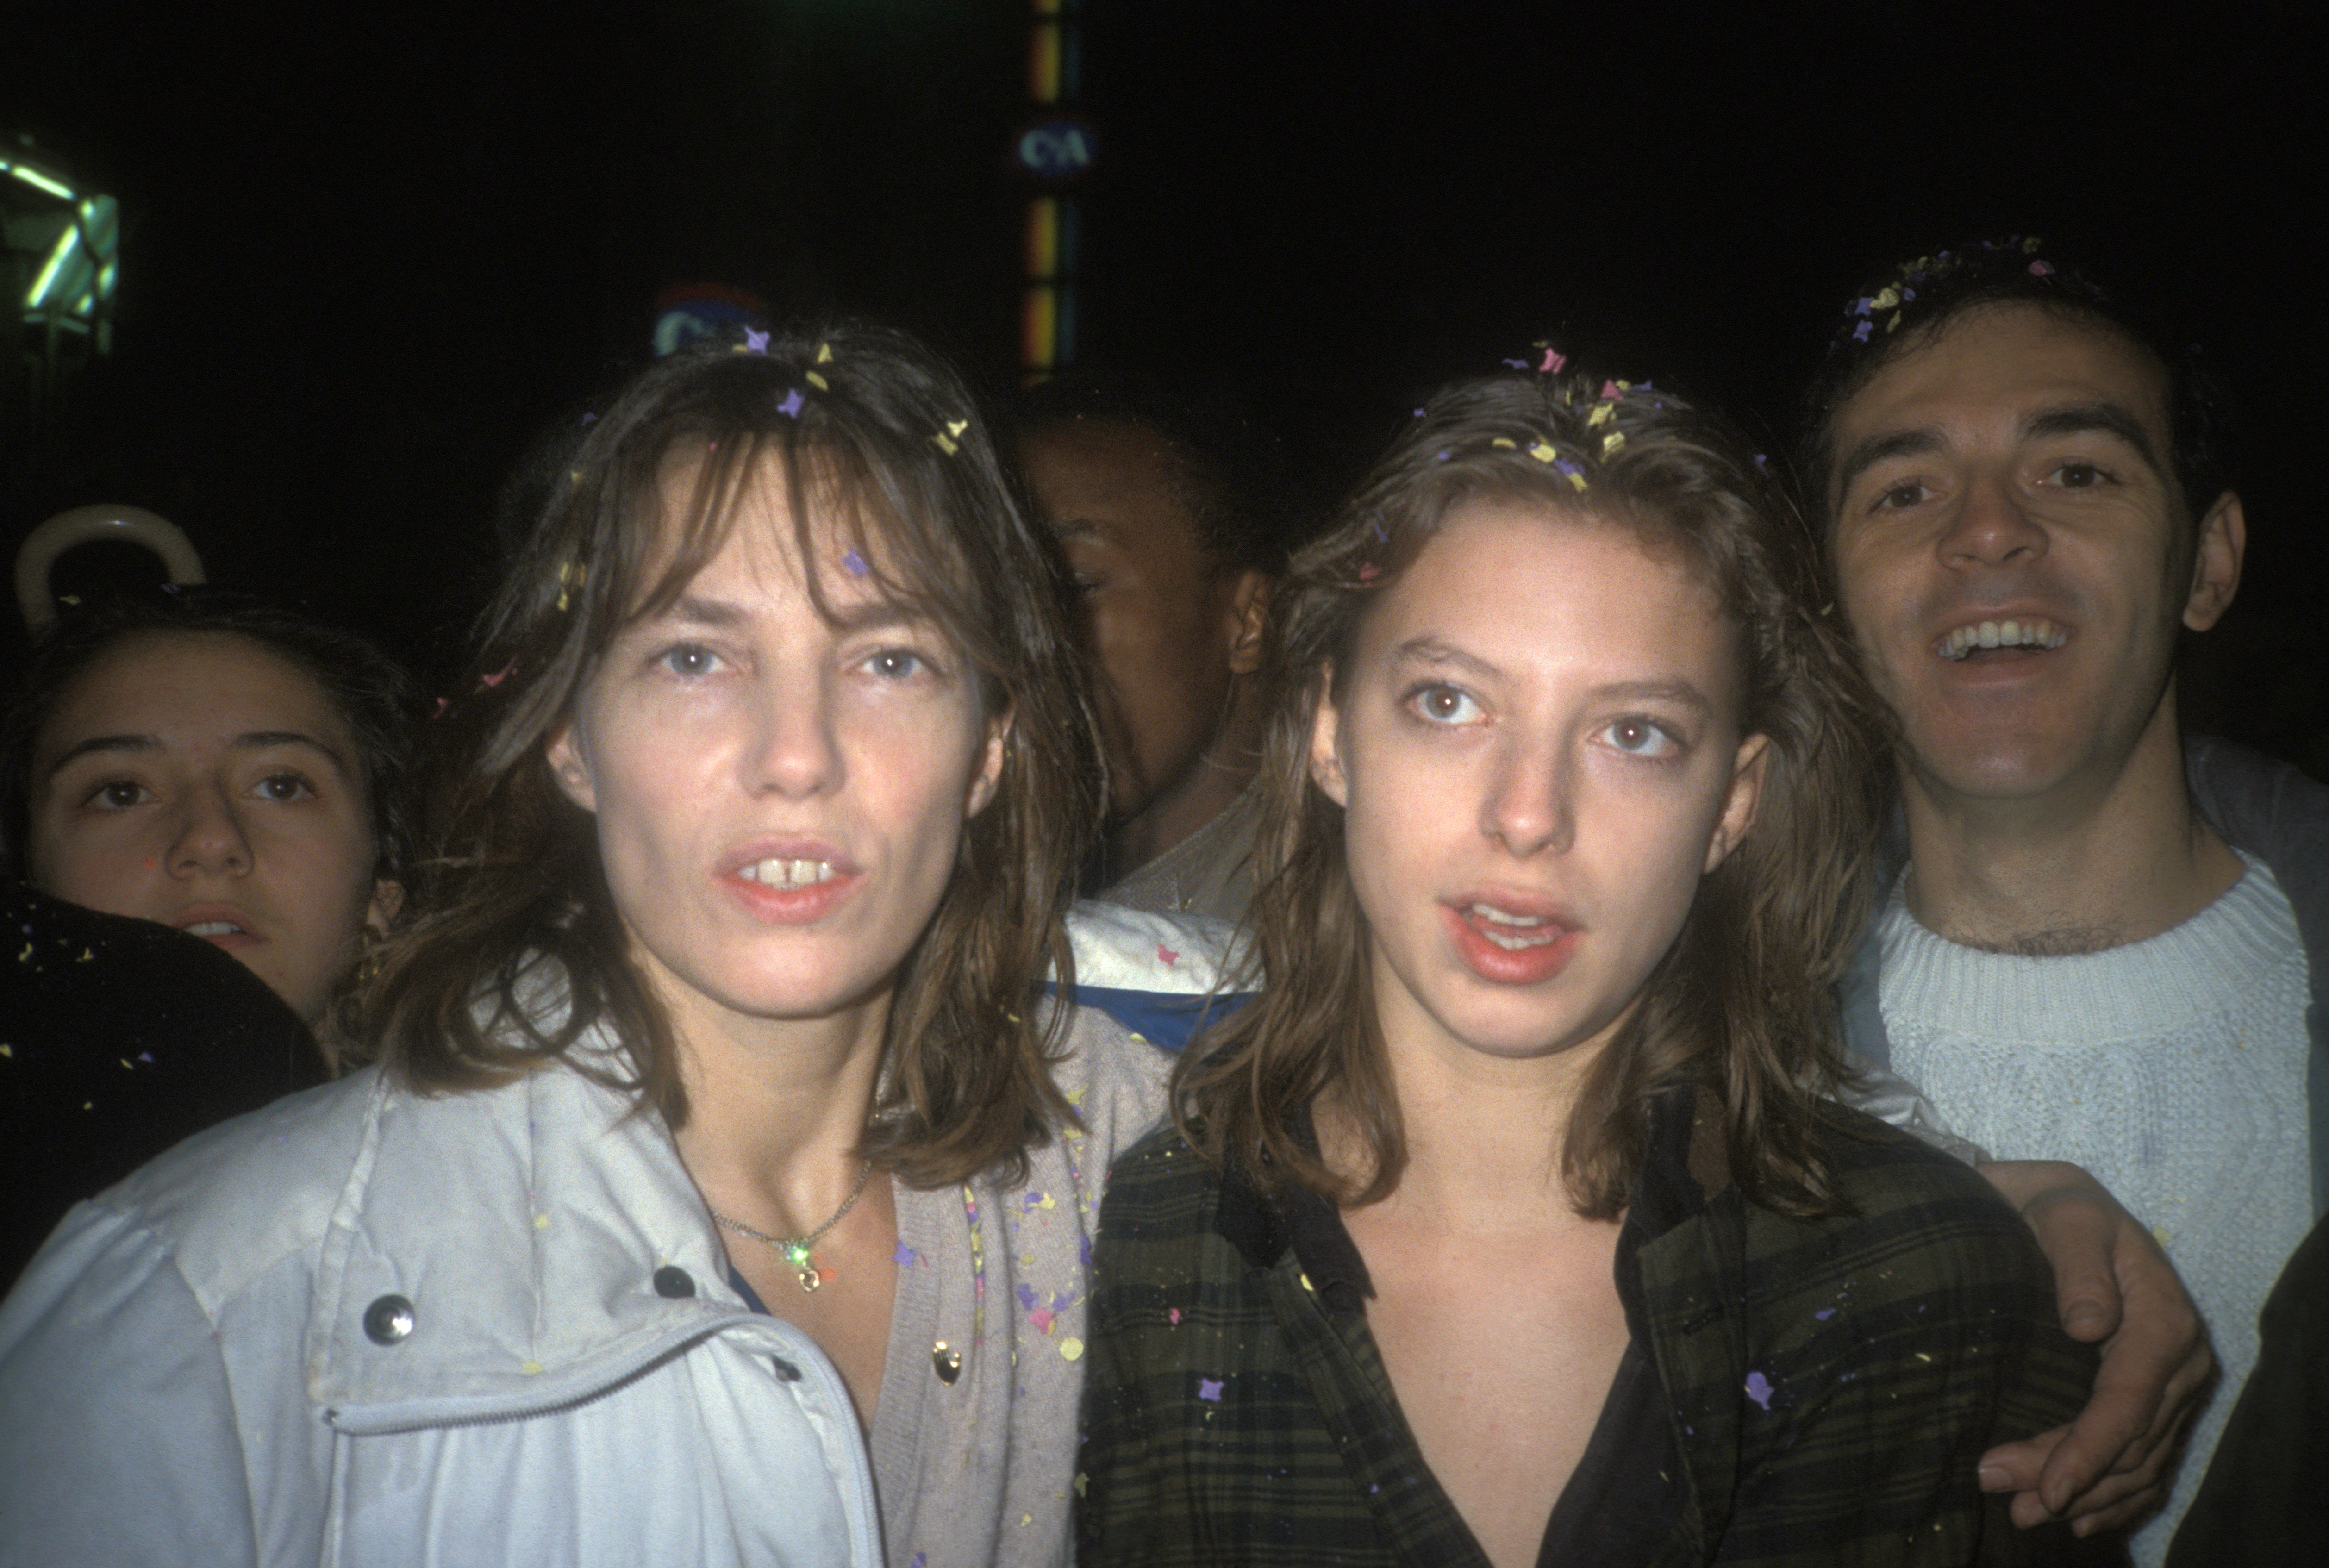 Jane Birkin and her daughter Kate Barry at the SOS Racisme party on December 7, 1985, in Paris, France. | Source: Getty Images